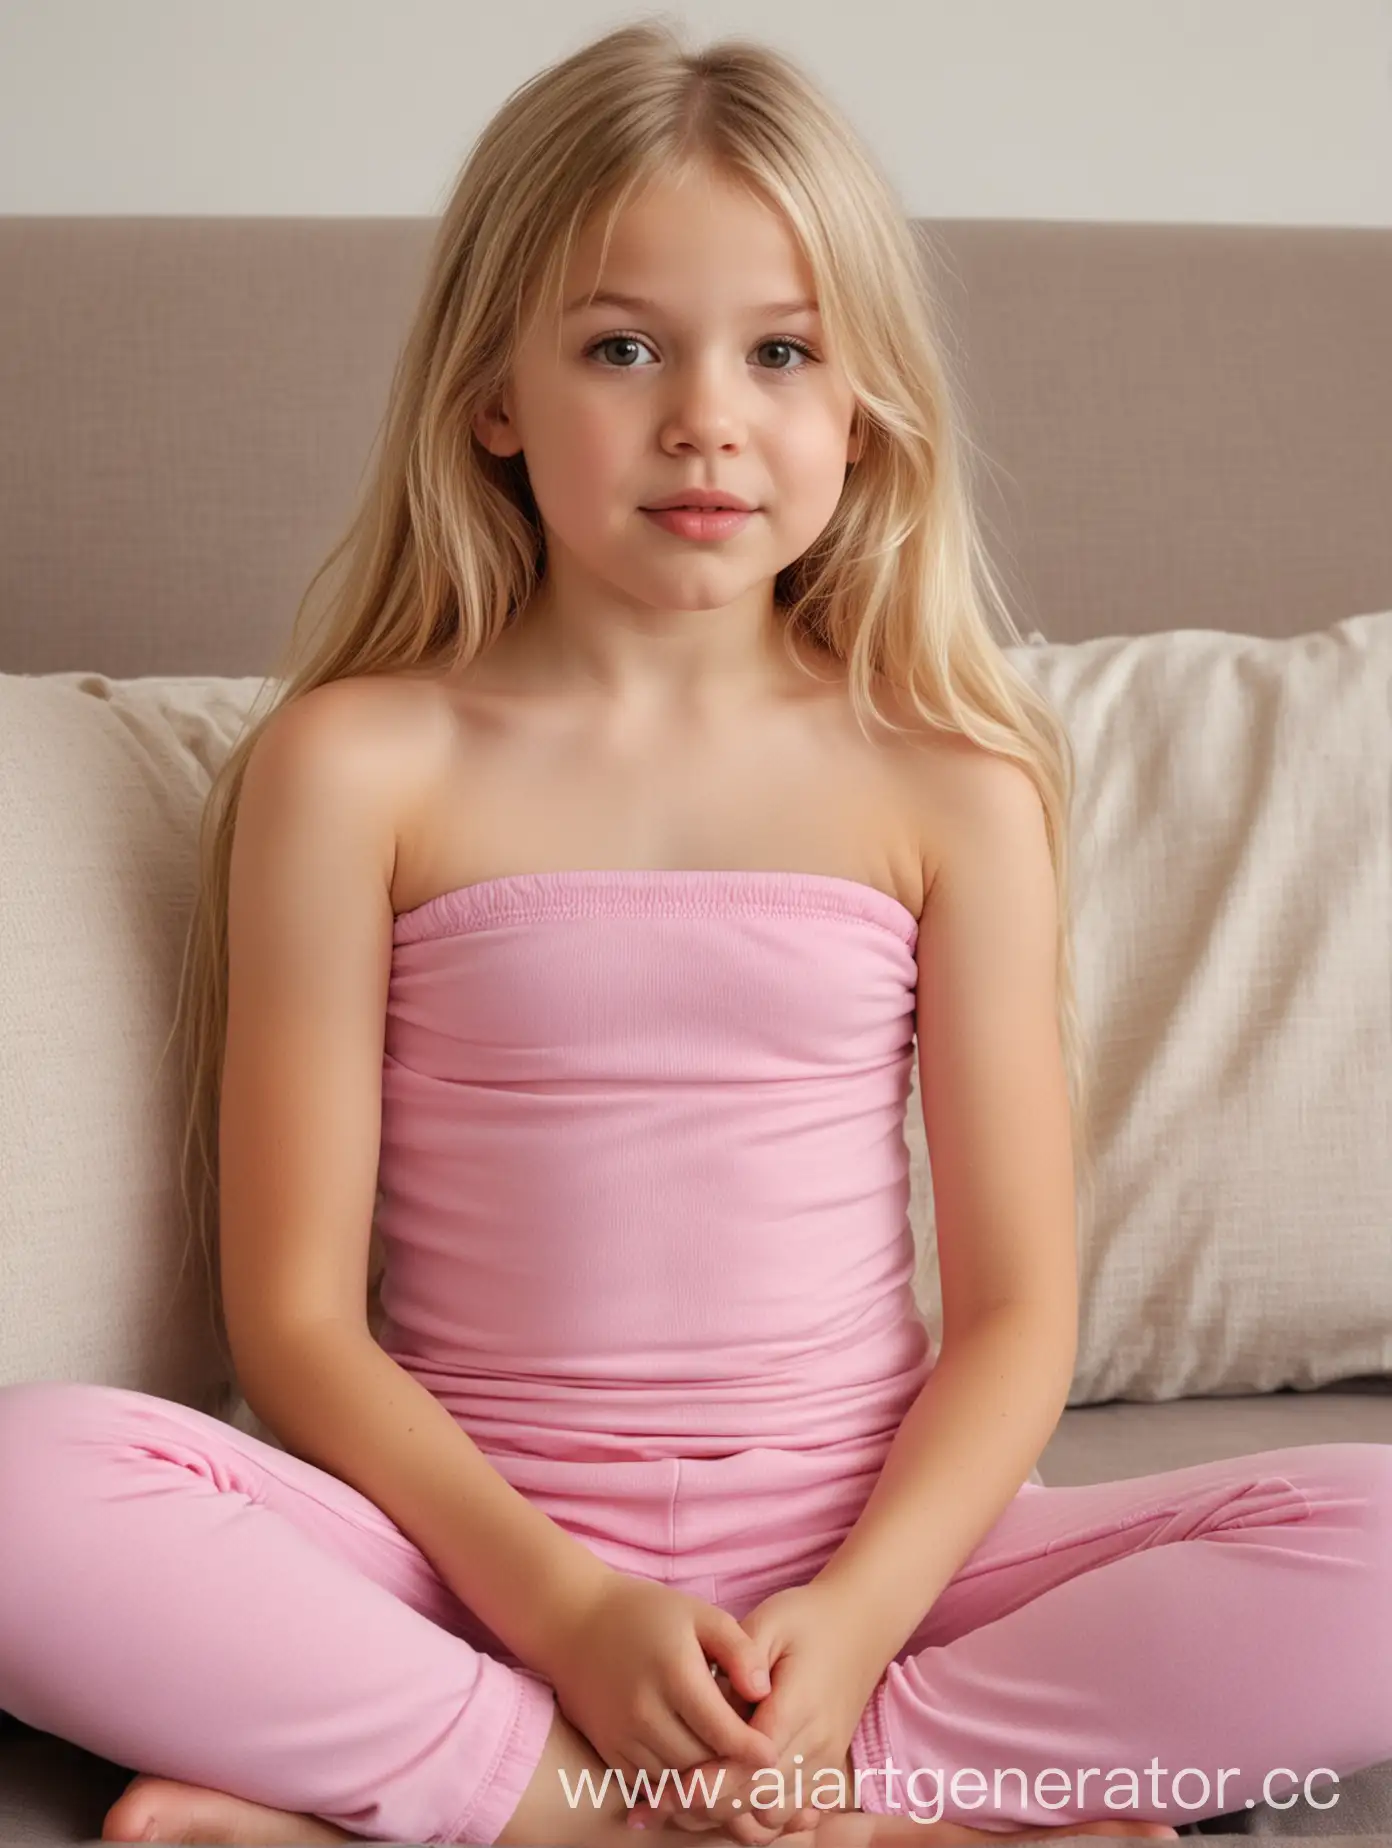 Gorgeous-10YearOld-Girl-in-Pink-Yoga-Pants-Sits-on-Sofa-in-Pain